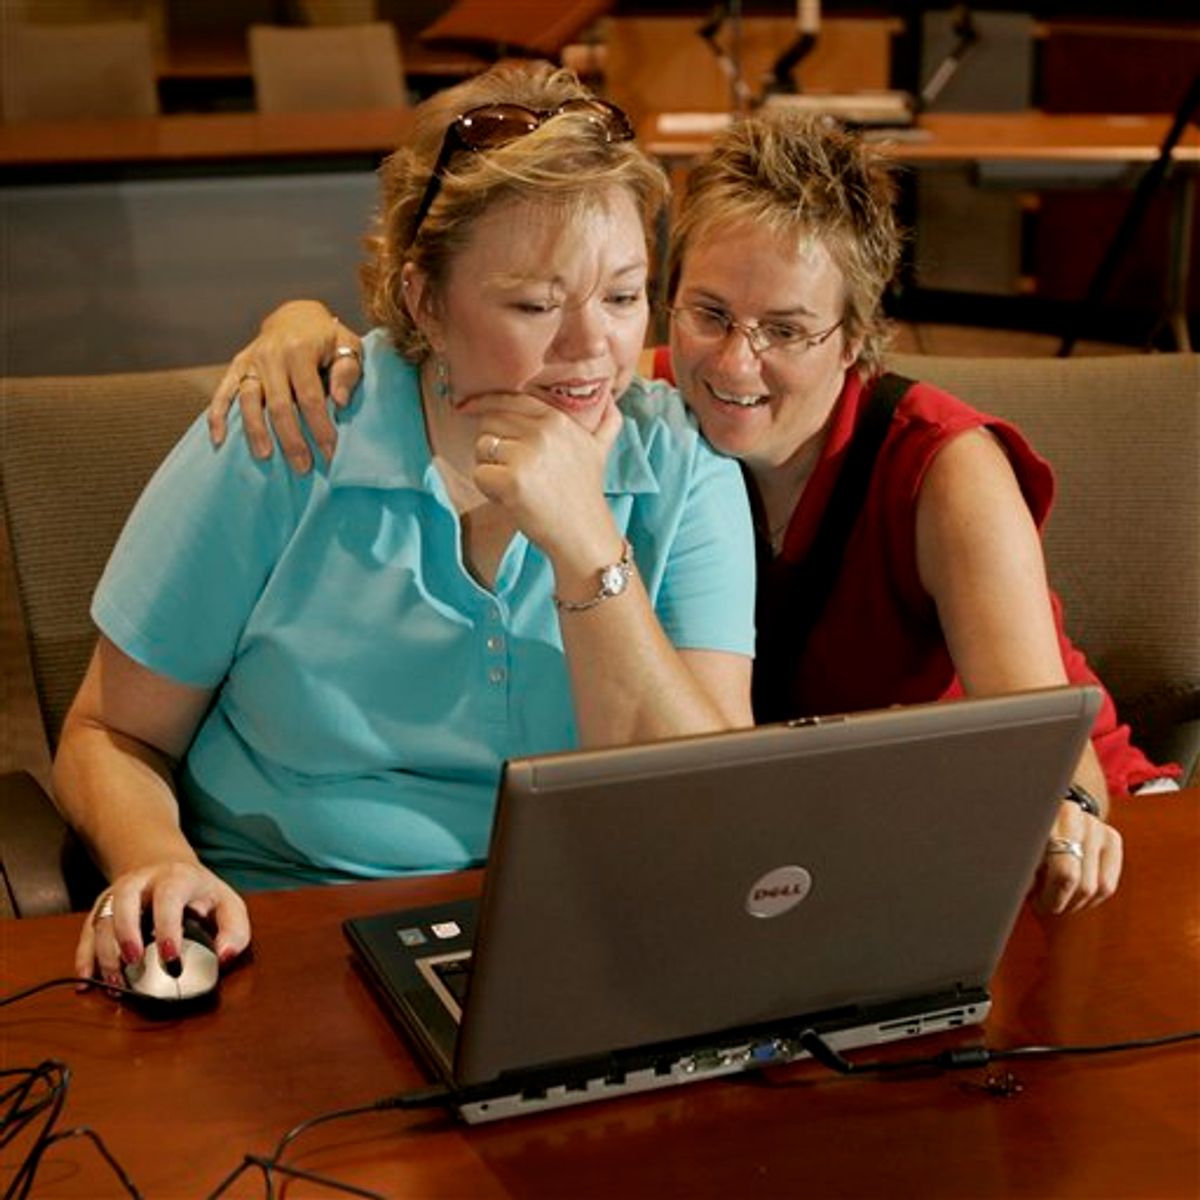 FILE - In this Aug. 1, 2007 file photo, Joyce Shontz, left, and Danita Long register as domestic partners at City Hall in Lawrence, Kan. Although fixing the economy is the top priority, Republicans who won greater control of state governments in the midterm elections are considering how to pursue action on a range of social issues, including abortion, gun rights and even divorce laws.  In Kansas, the victory by gov.-elect Sam Brownback, a strong opponent of abortion and gay marriage, has created strong expectations among evangelical supporters. (AP Photo/Charlie Riedel, File) (AP)